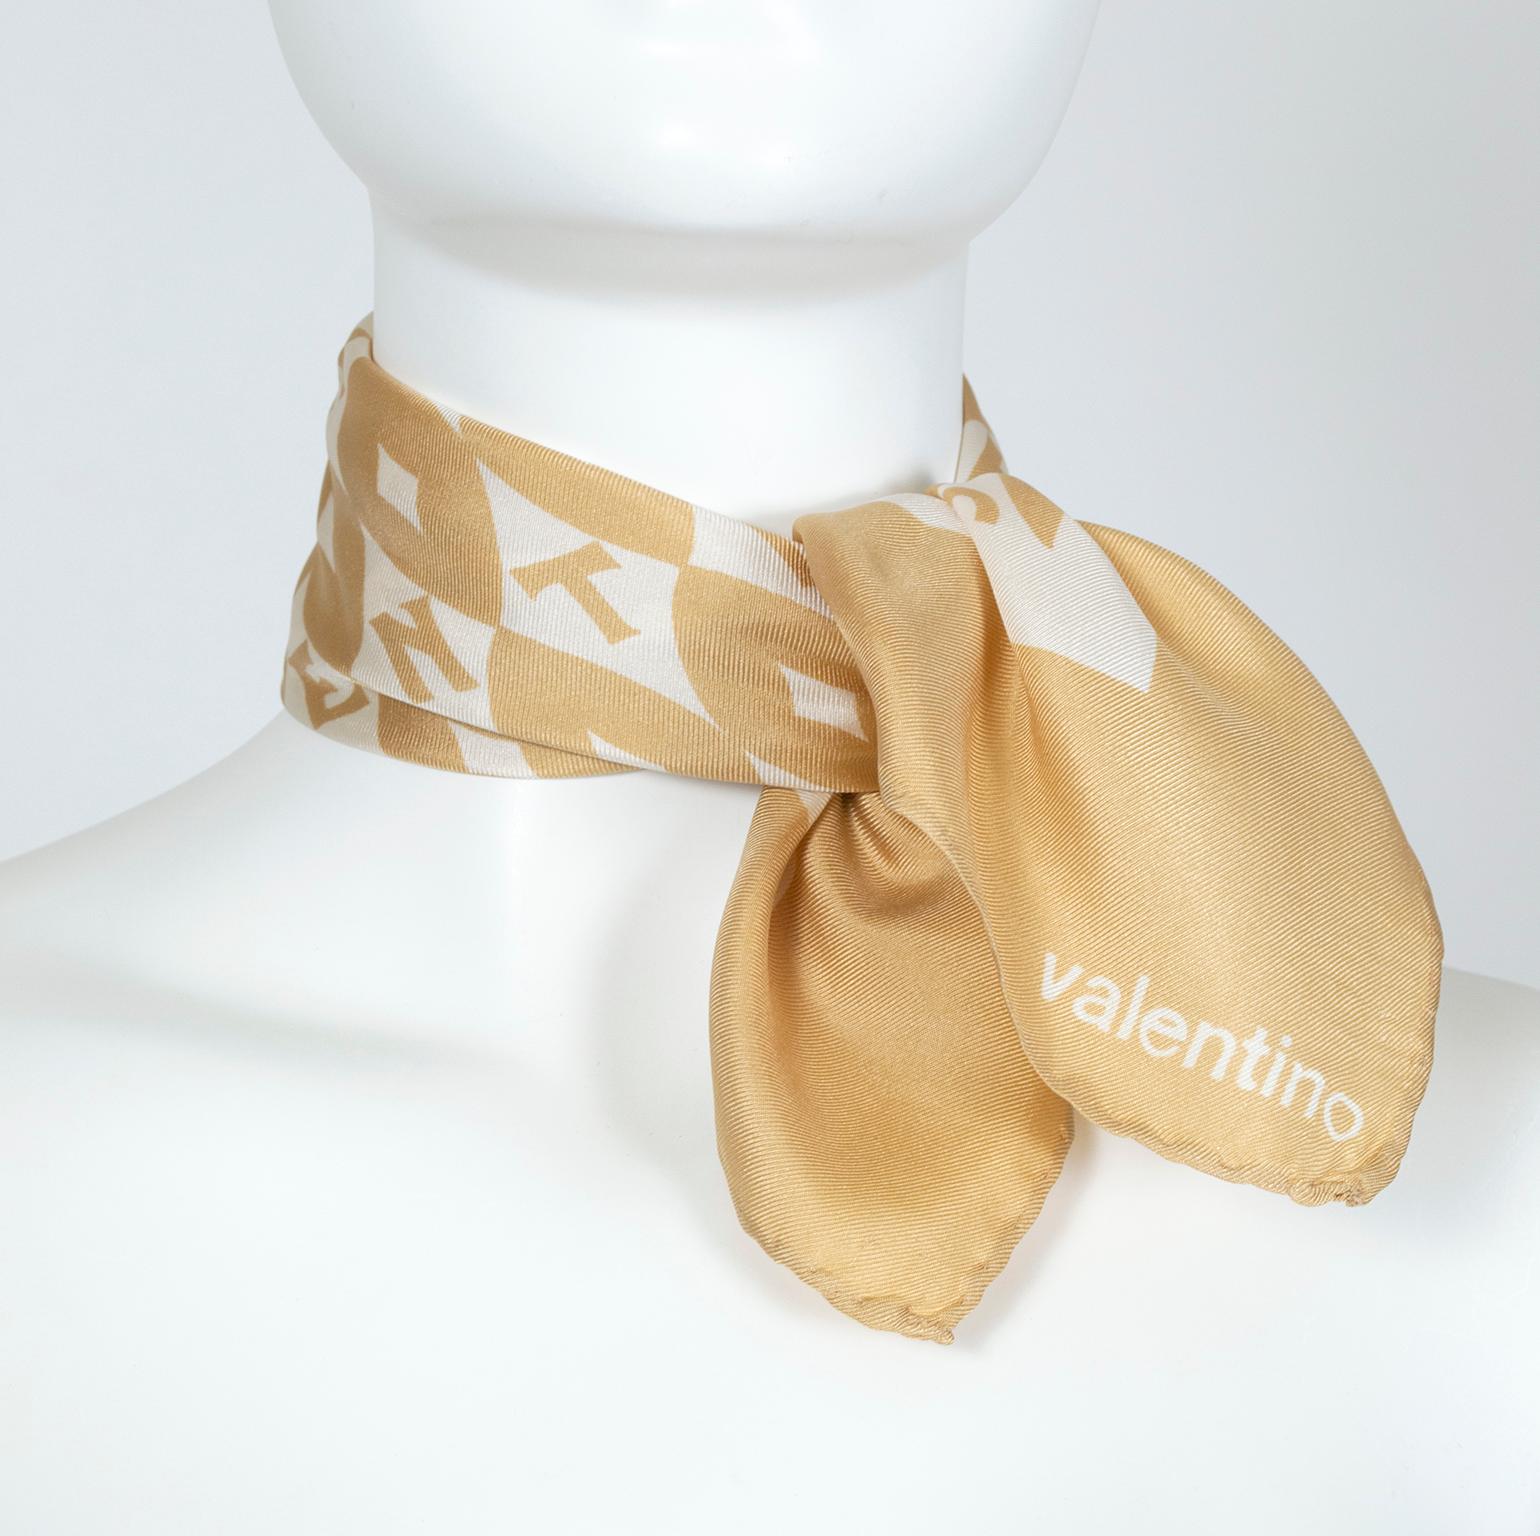 With just enough pop to catch the eye, this otherwise neutral signature scarf pairs with almost any colorway and is large enough to wear around the neck, on the head or on a purse handle for a little extra panache.

Single-ply silk twill scarf with